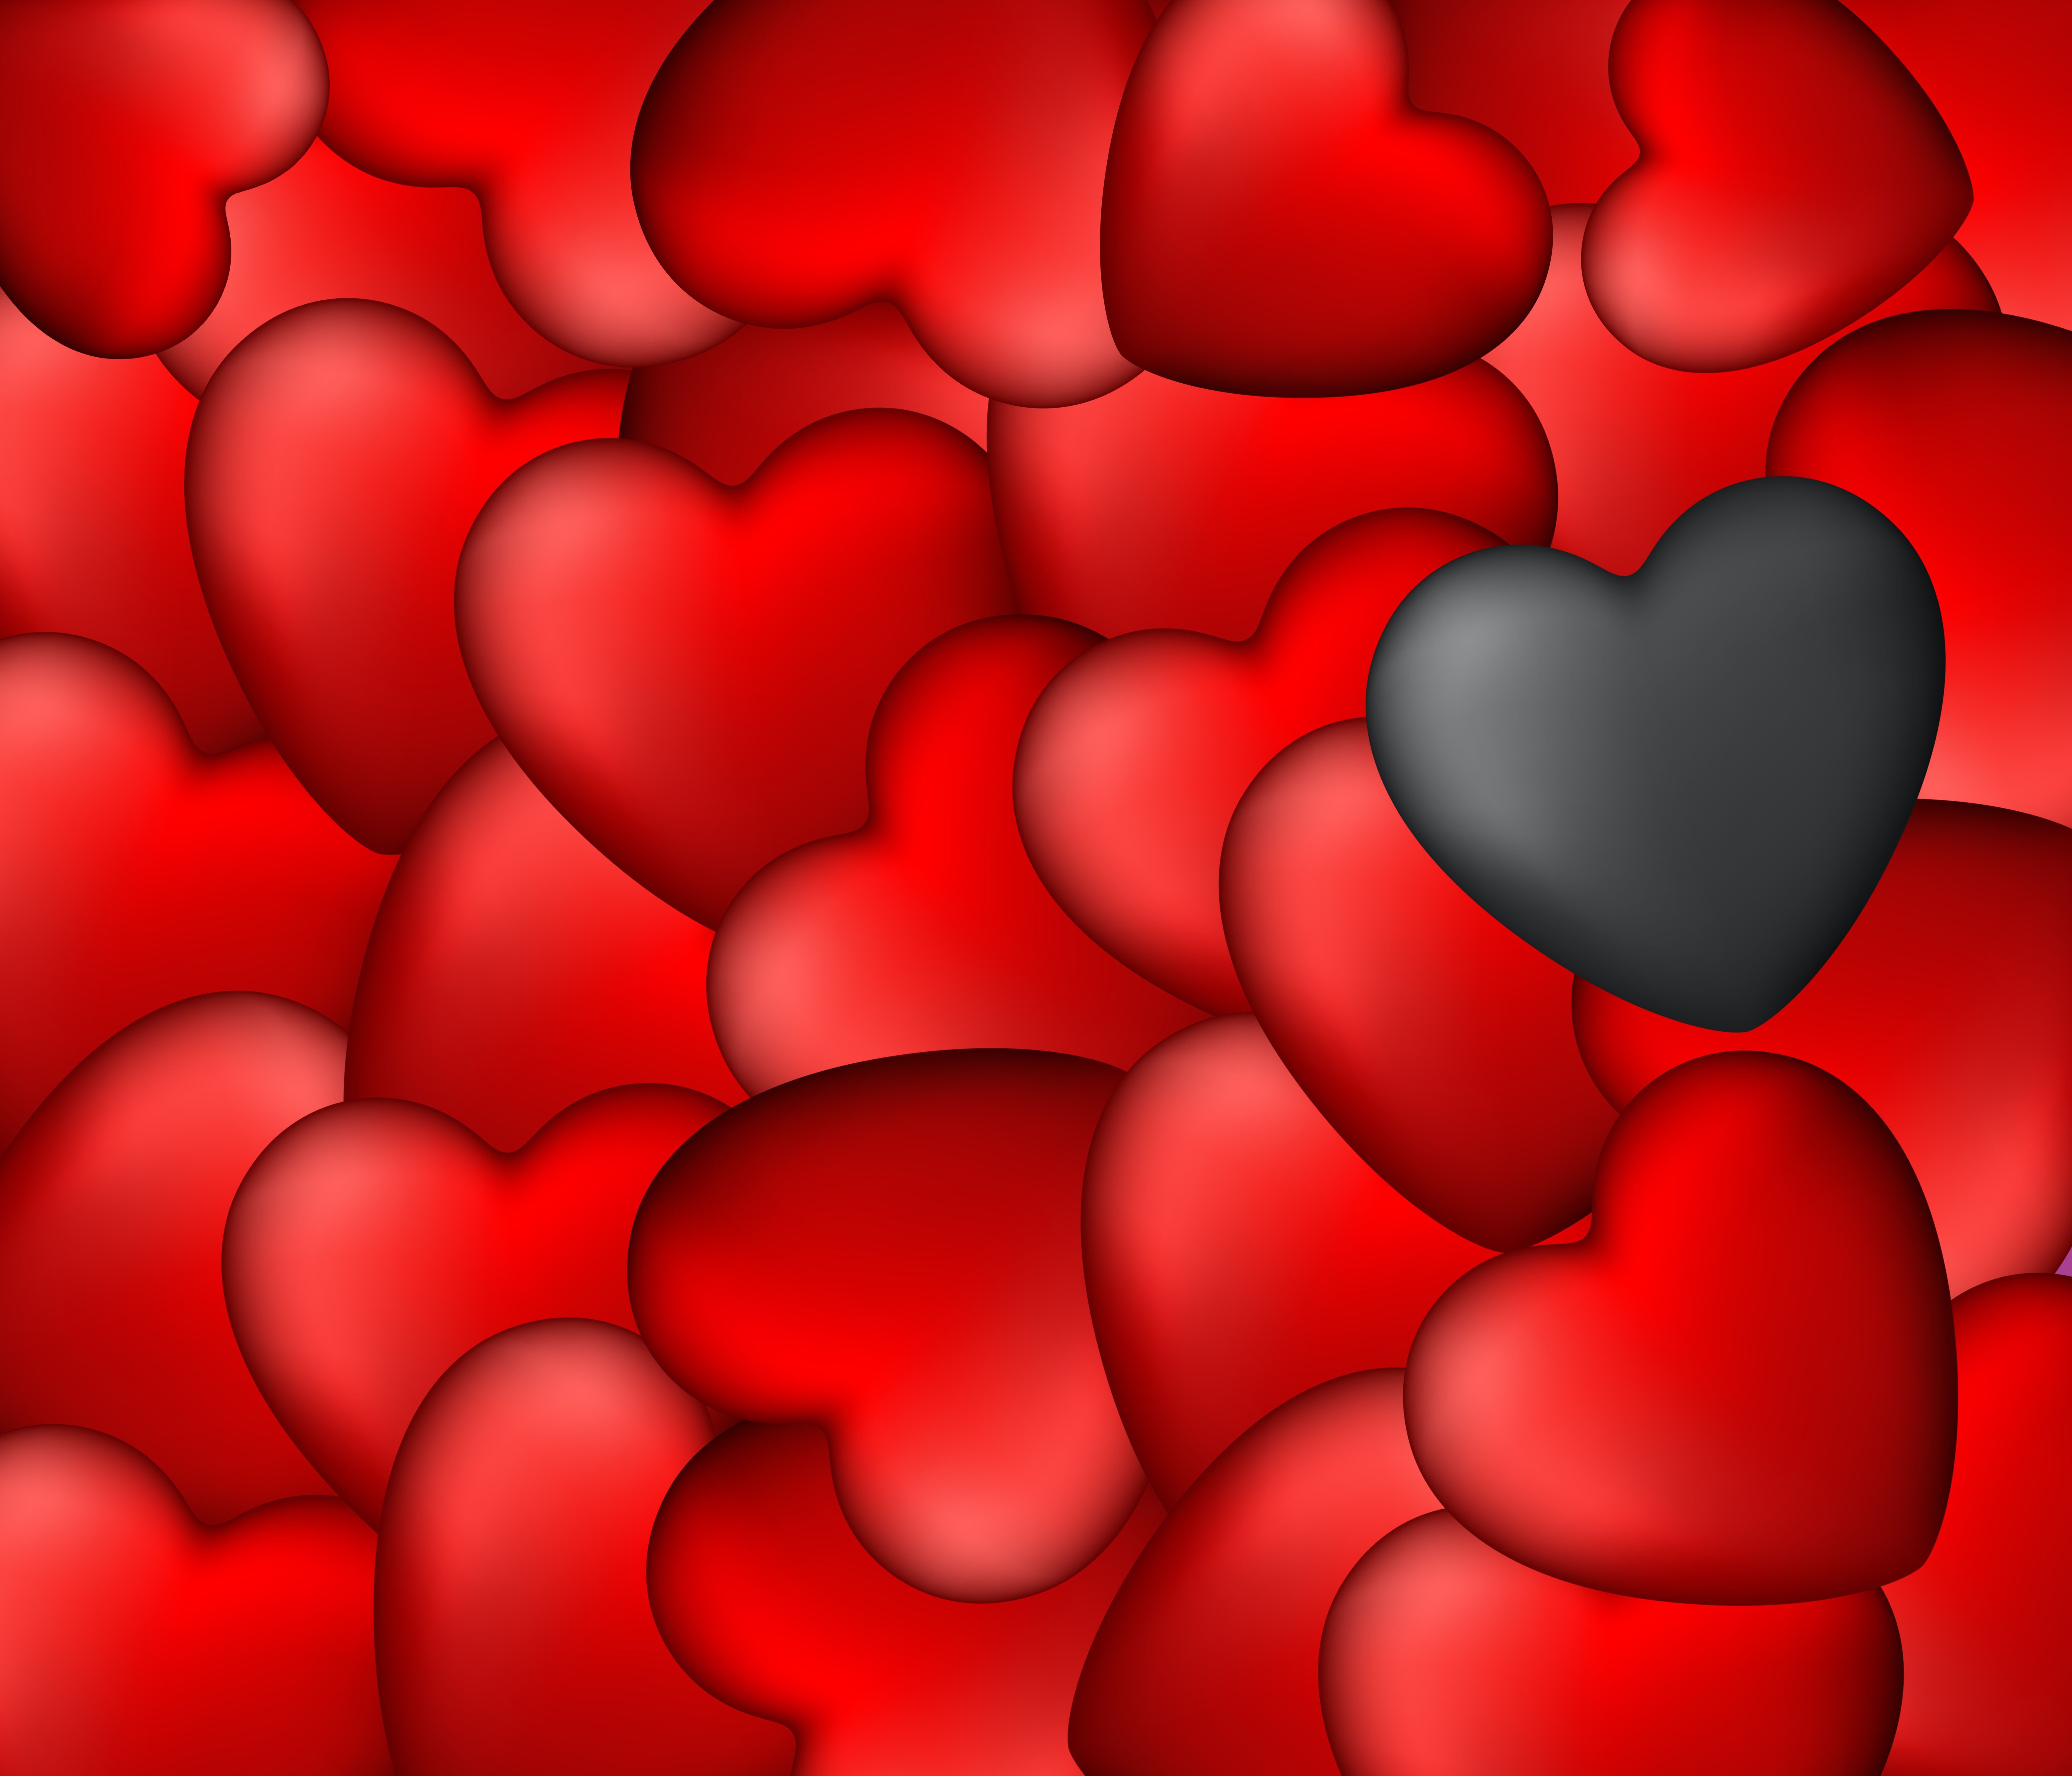 68653 download wallpaper love, art, hearts, black, red screensavers and pictures for free